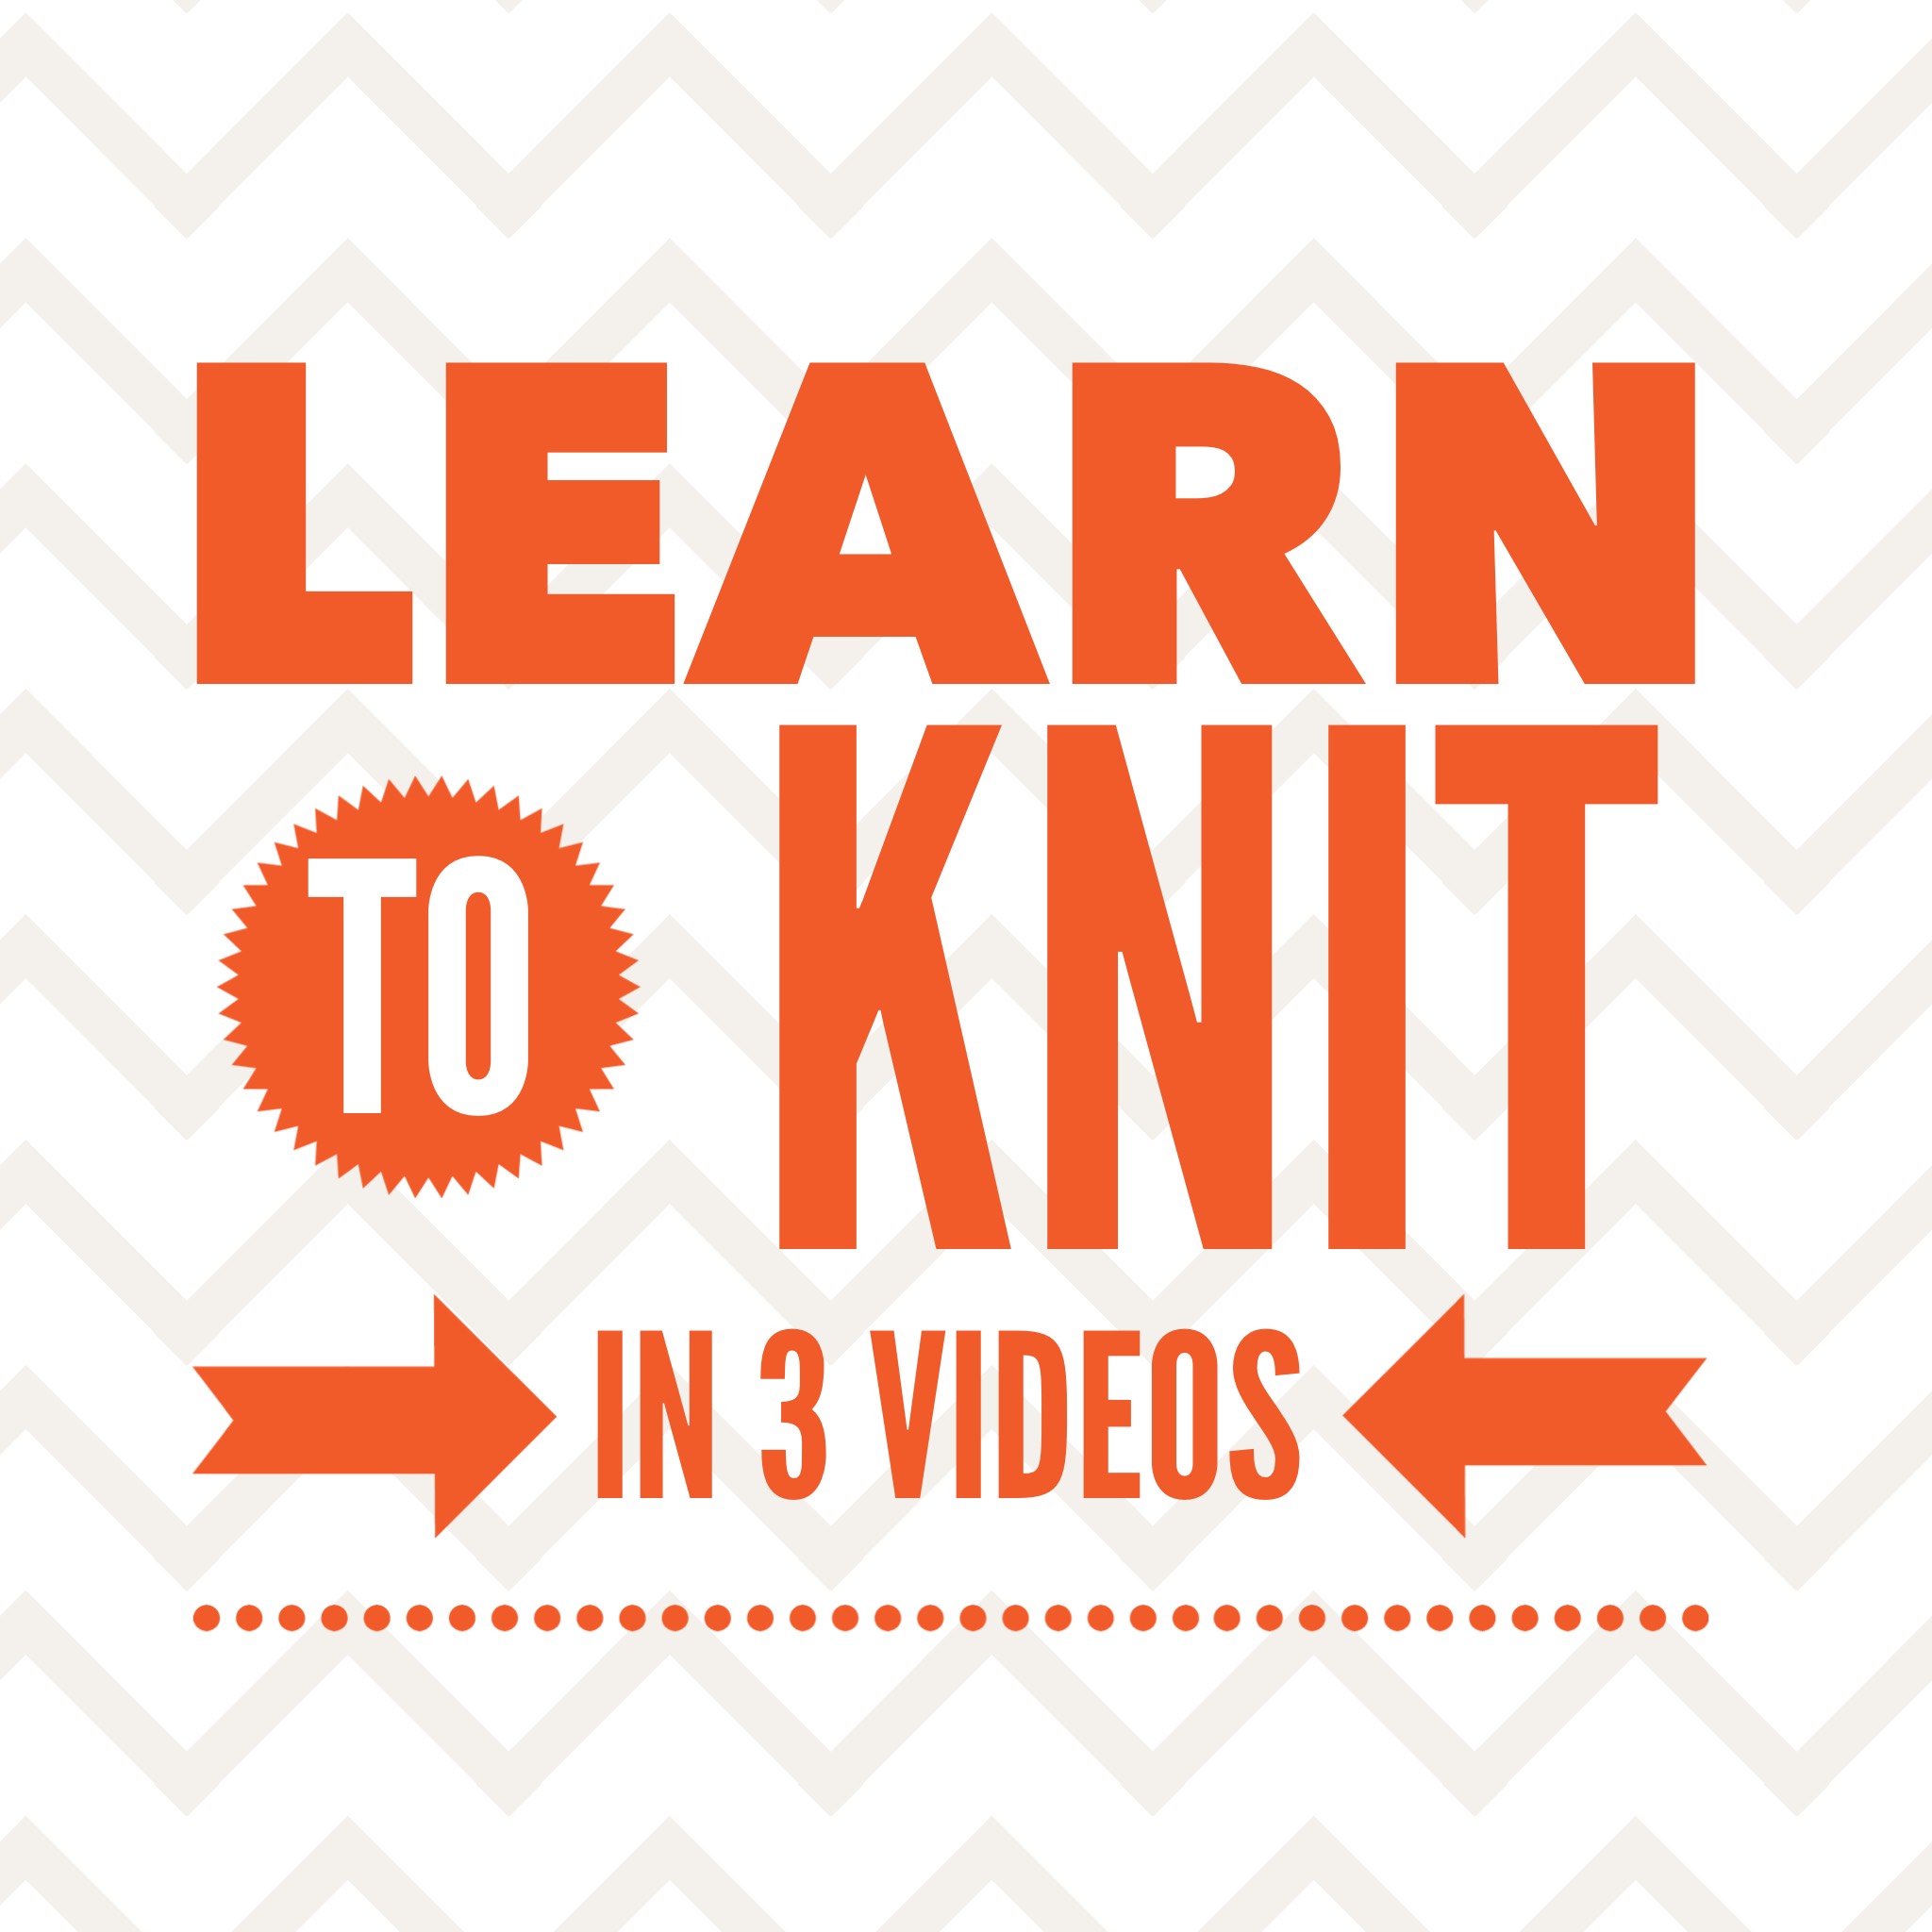 Get Started Knitting with These 3 Videos